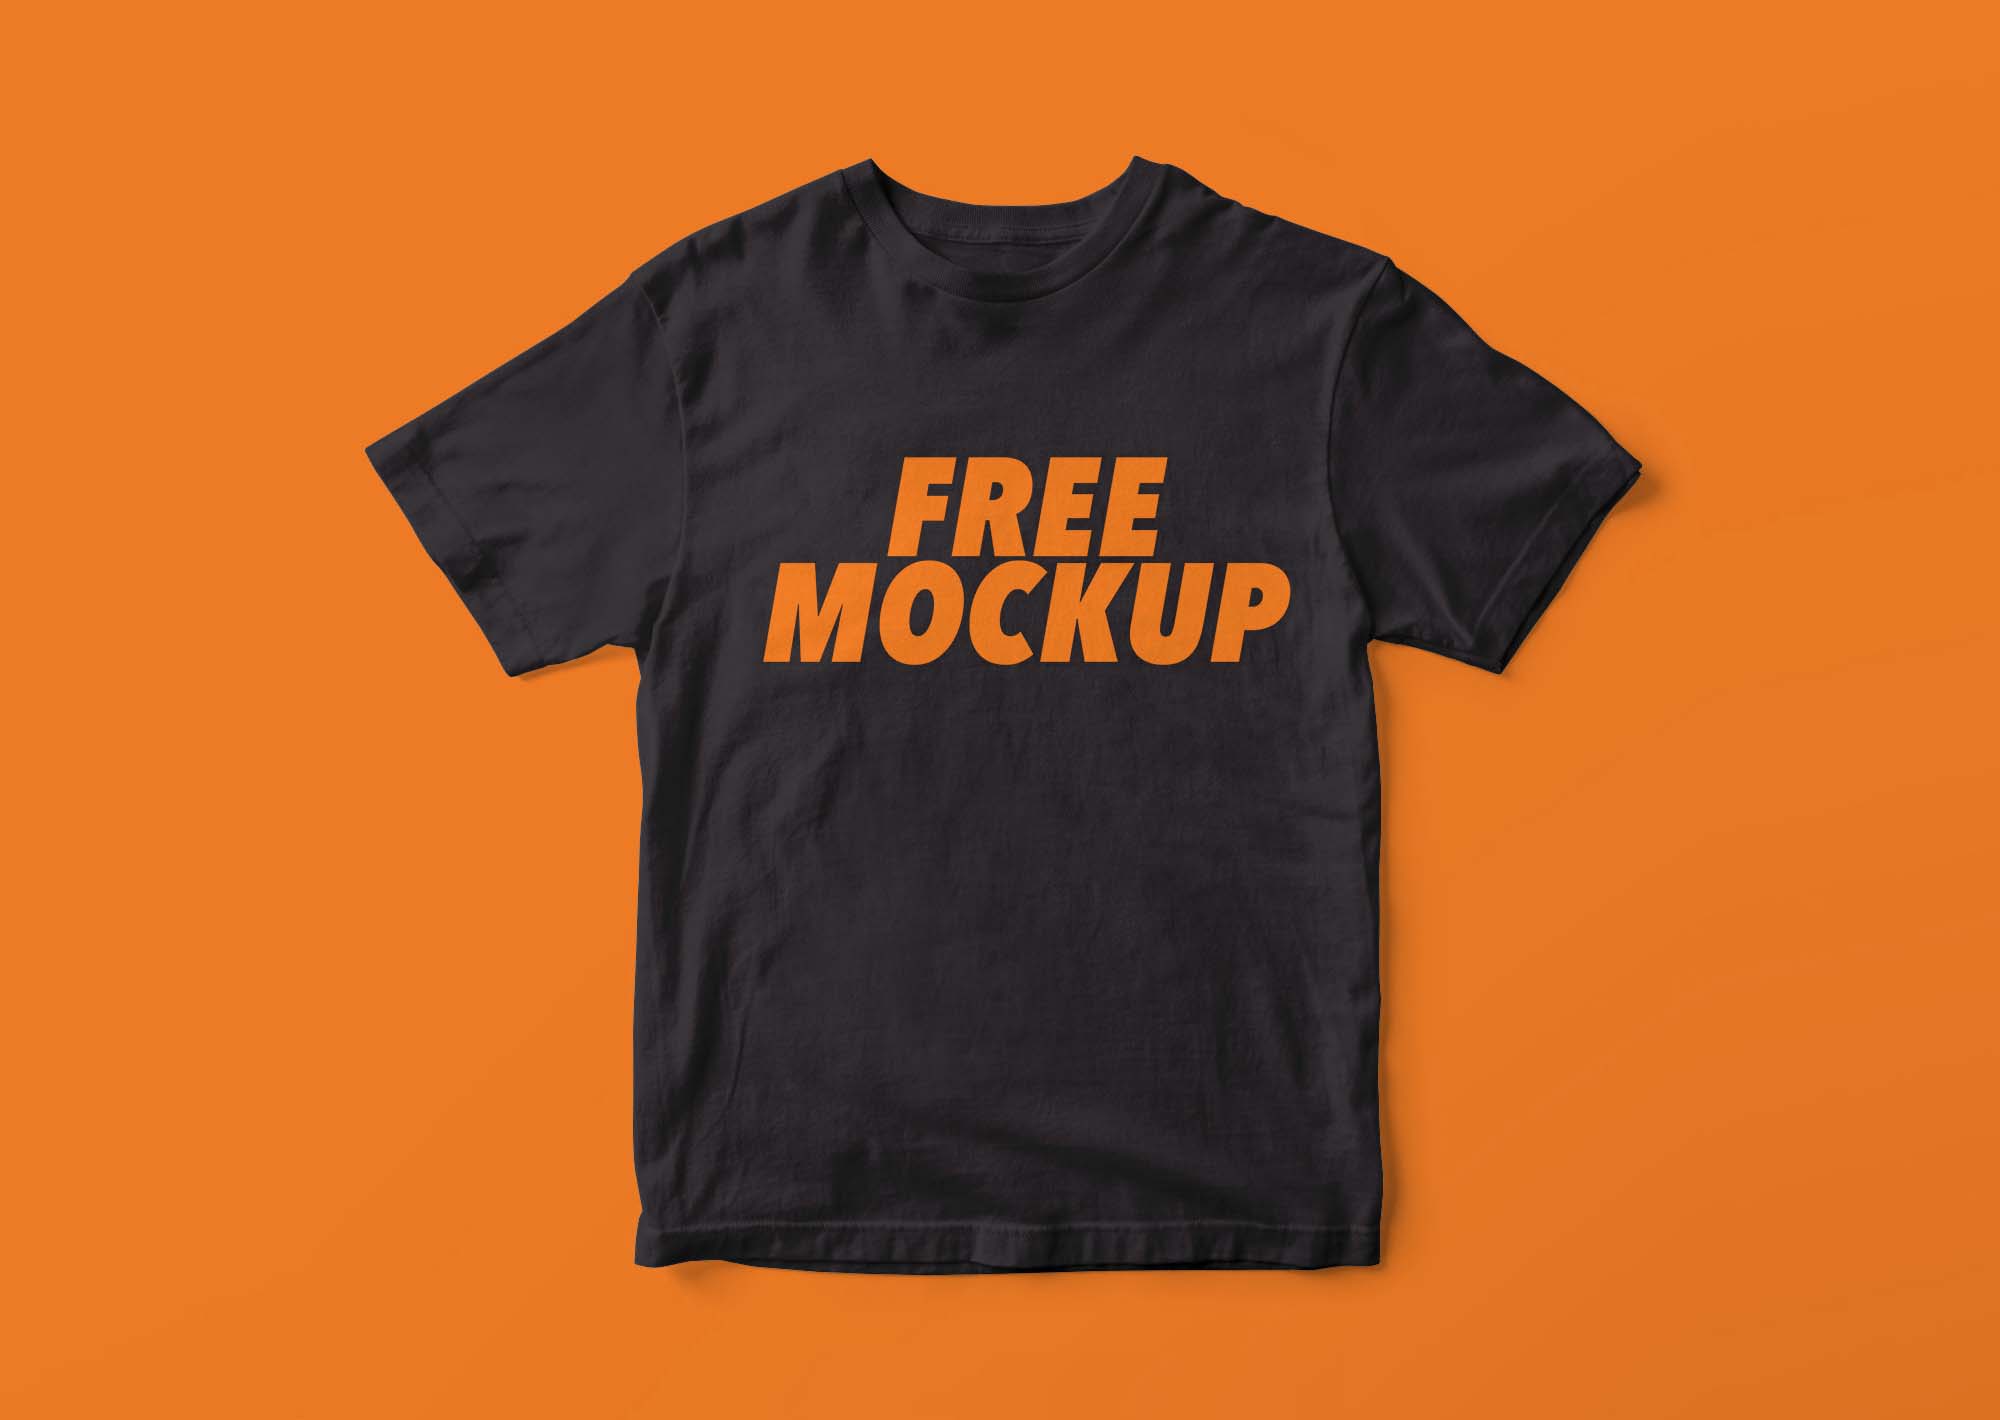 Download Classical T-shirt PSD Mockup (Free) by Anoir Chafik